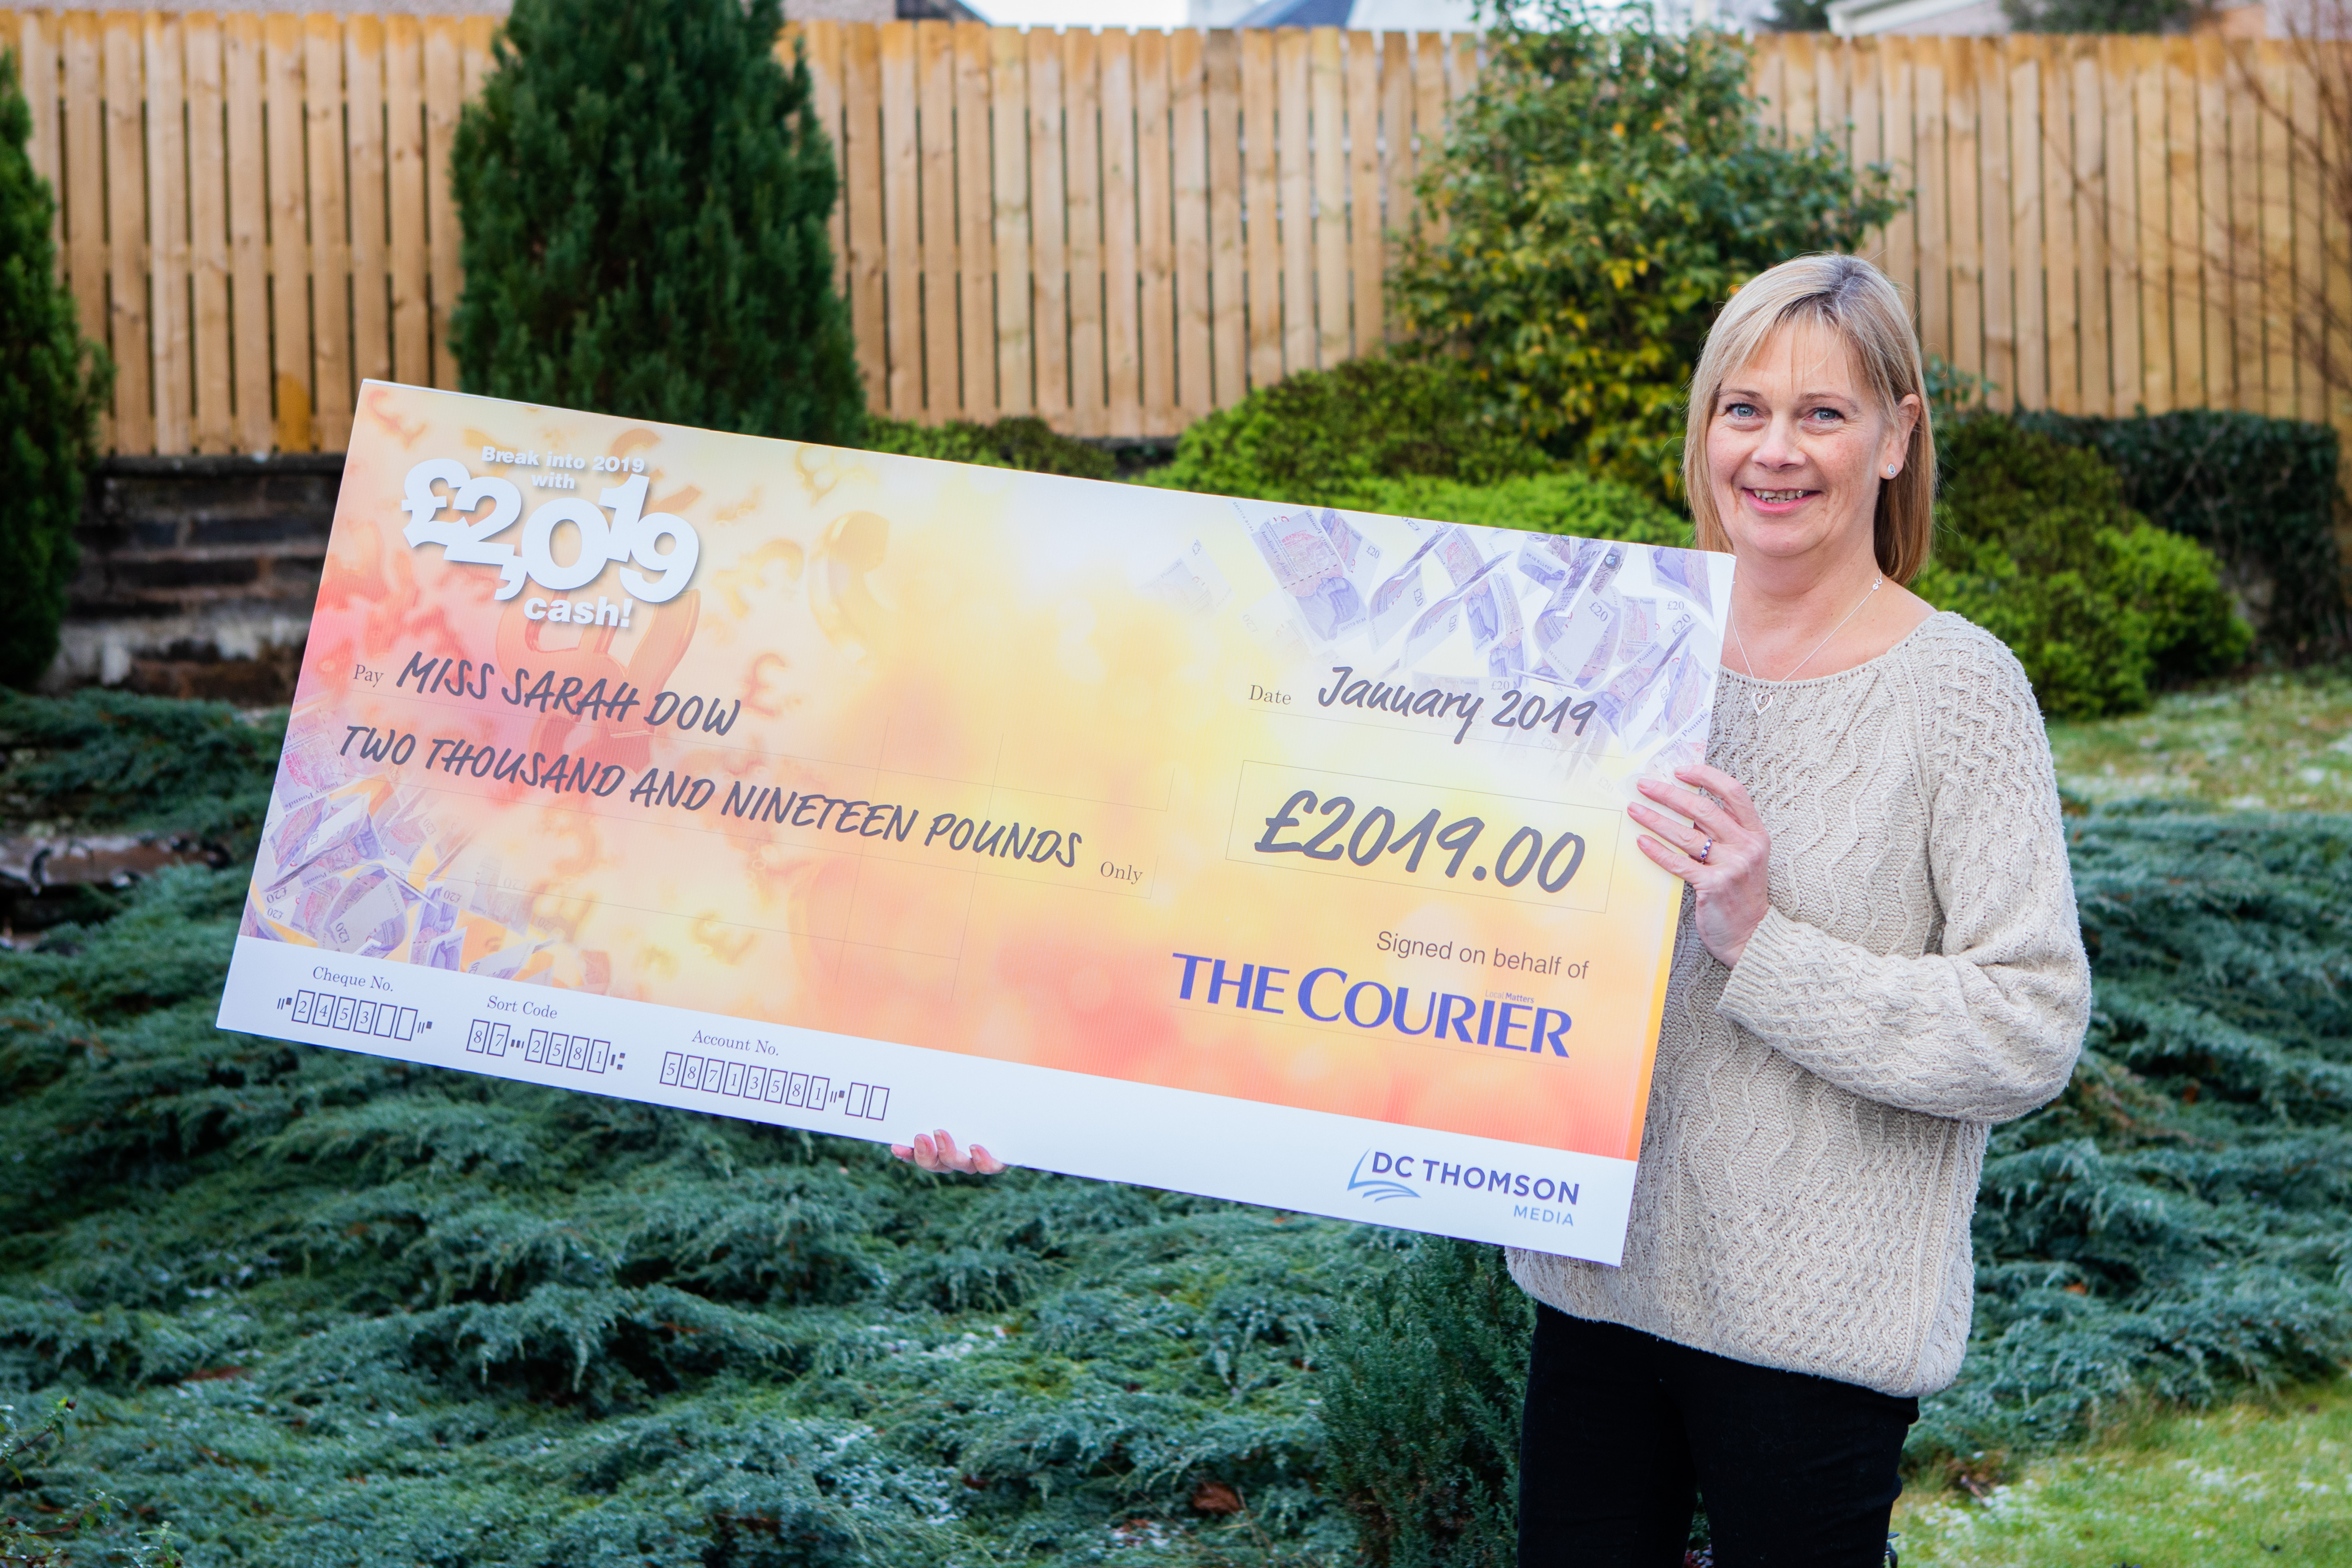 Courier News, Ross Gardiner Story, CR0005714 £2019 presentation - Pictures of Sarah Dow who won a cash prize of £2019 with The Courier competition. Picture shows Sarah Dow with the cheque. 2 Mansfield Road, Scone. Tuesday 22nd January 2019  Pic Credit - Steve MacDougall / DCT Media